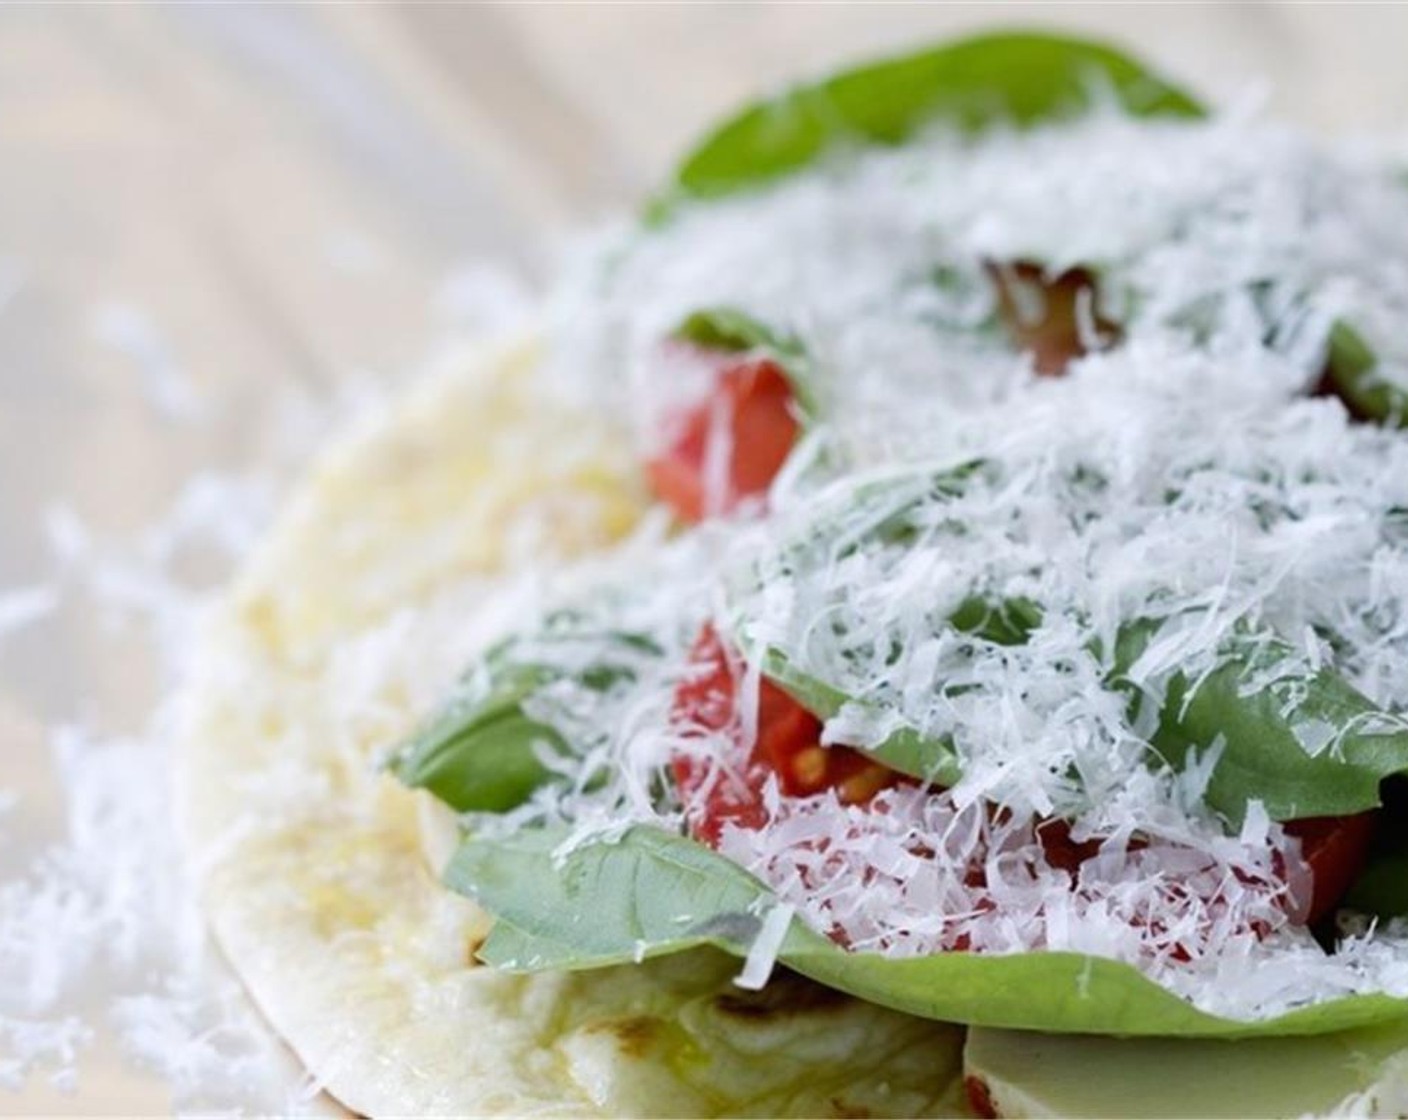 step 3 Add a few slices of the Roma Tomatoes (2) to each flatbread. Sprinkle equal amounts of Mozzarella Cheese (1 cup) on each, and place the Fresh Basil Leaf (1 bunch) over the cheese. Finally, sprinkle with Grated Parmesan Cheese (1/3 cup) over each.